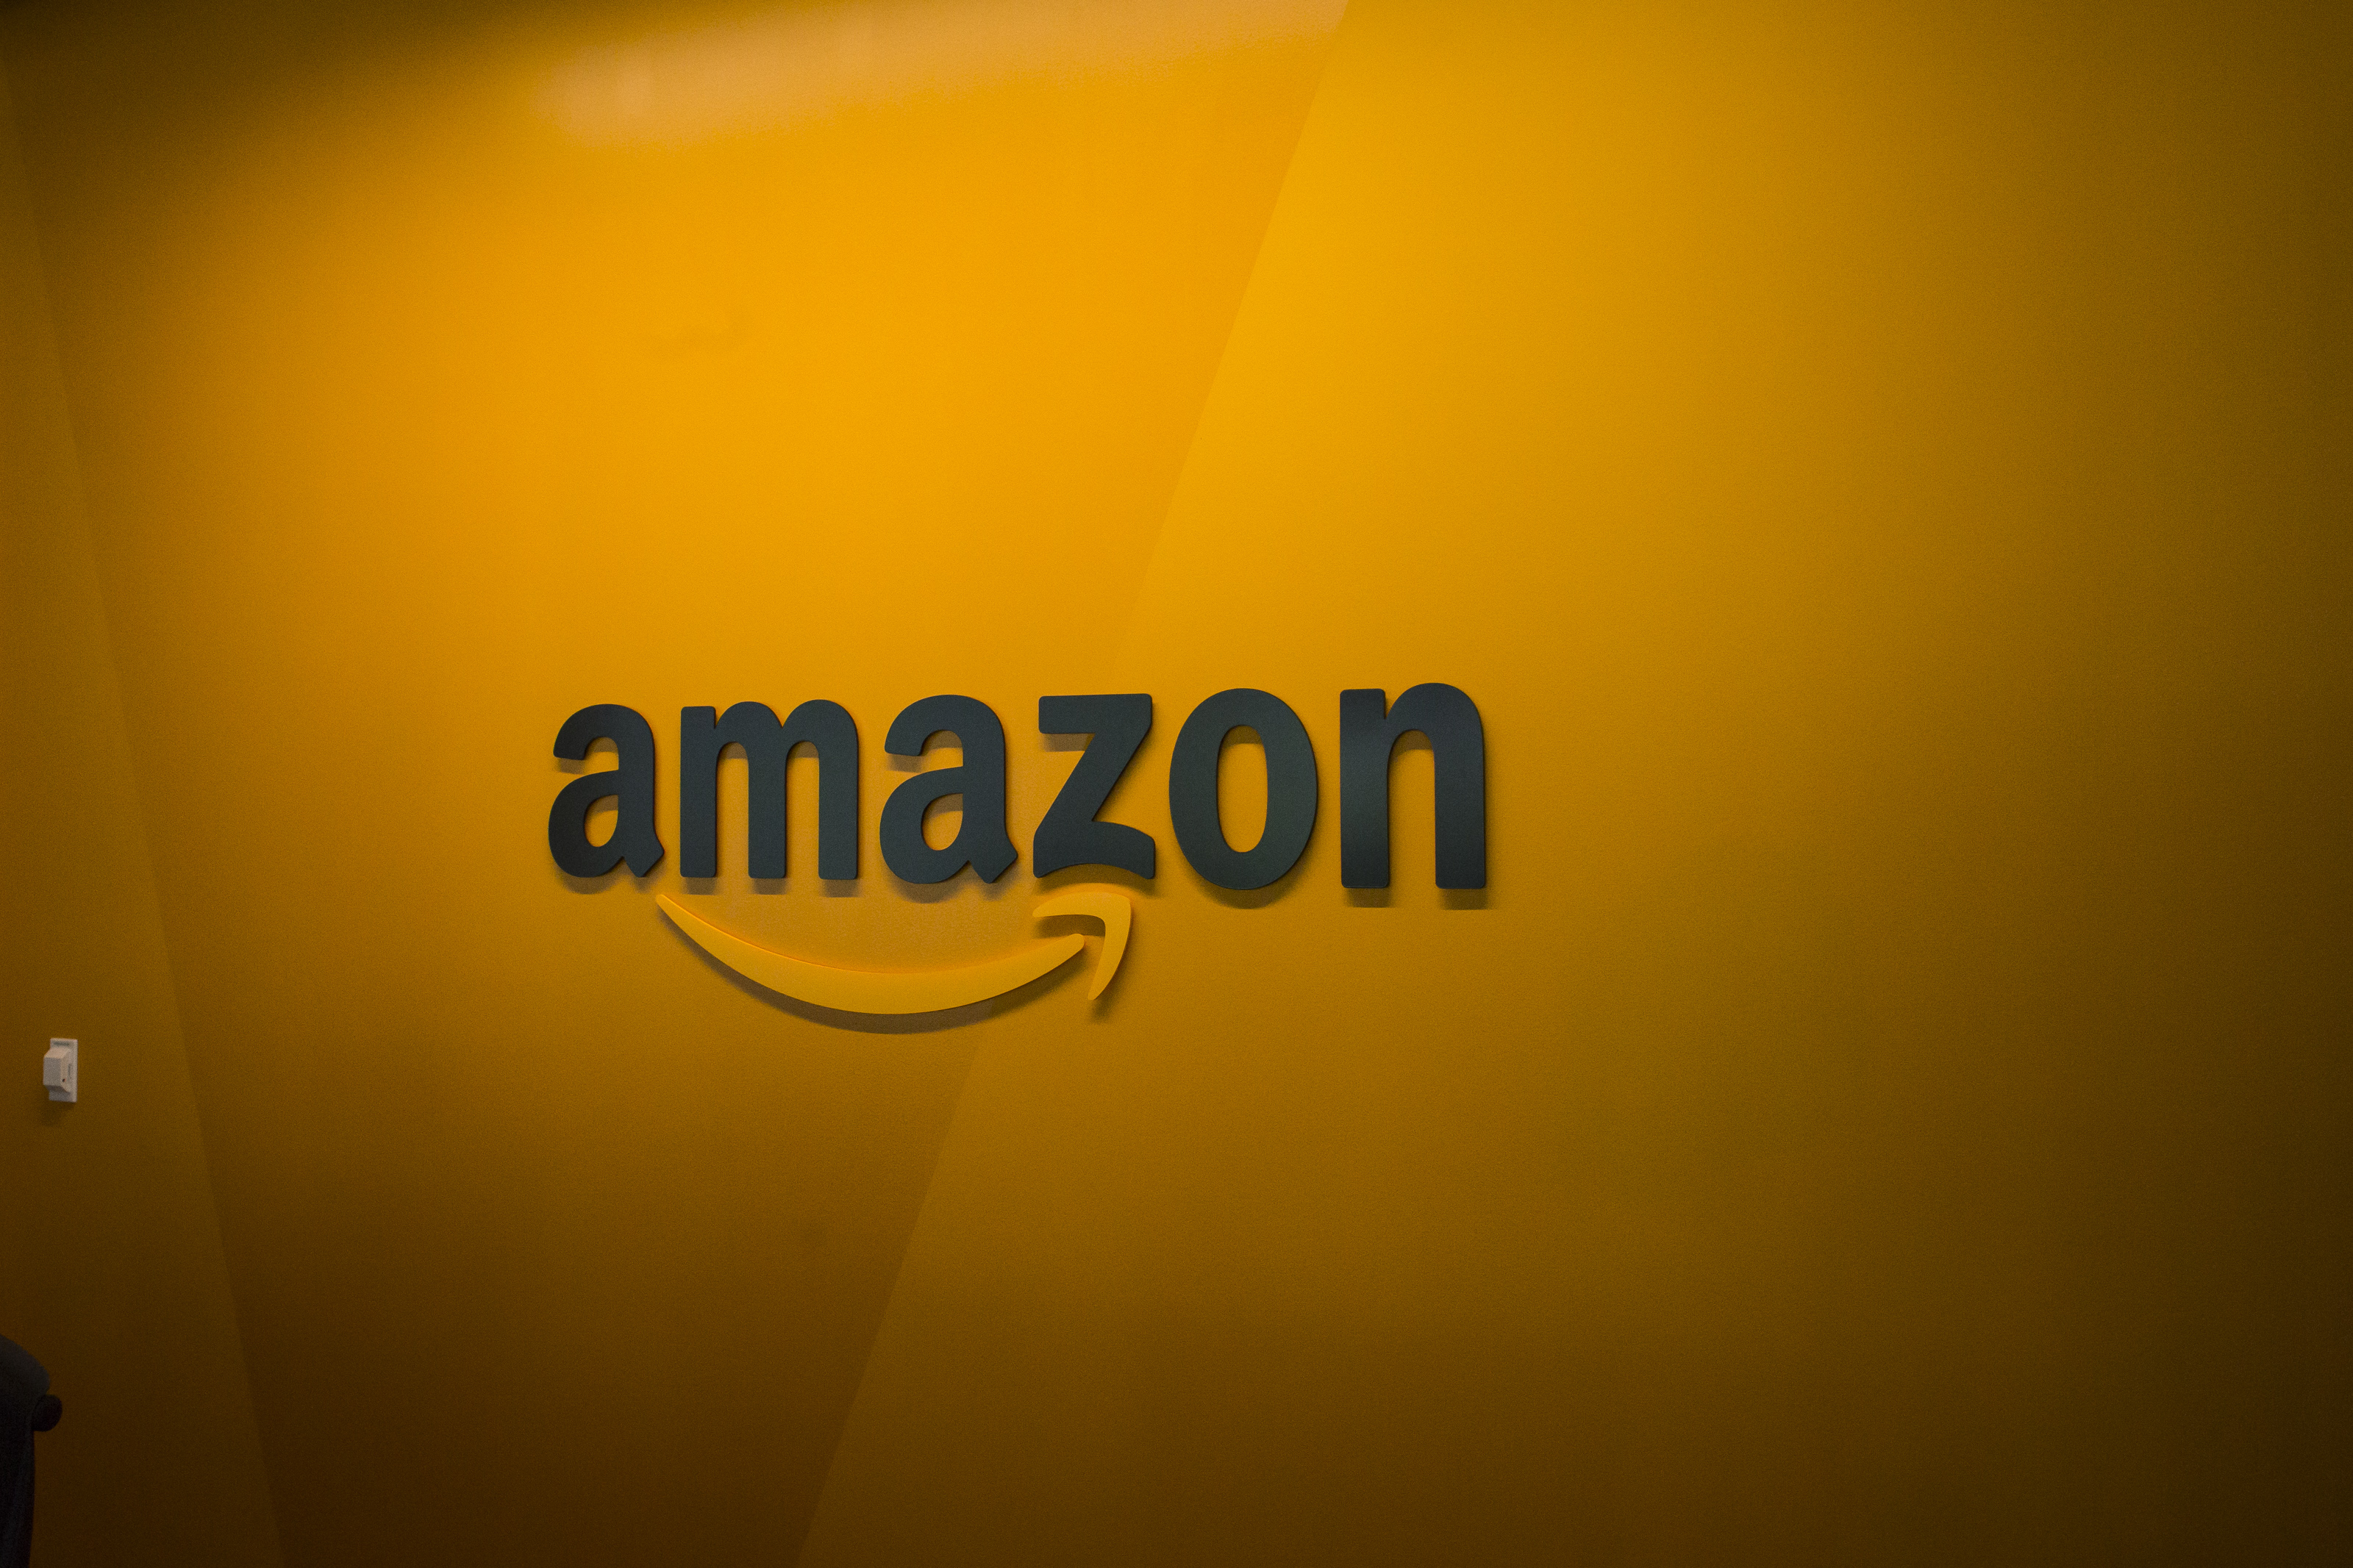 Amazon Testing Out System That Allows Customers To Pay By Scanning Their Hands